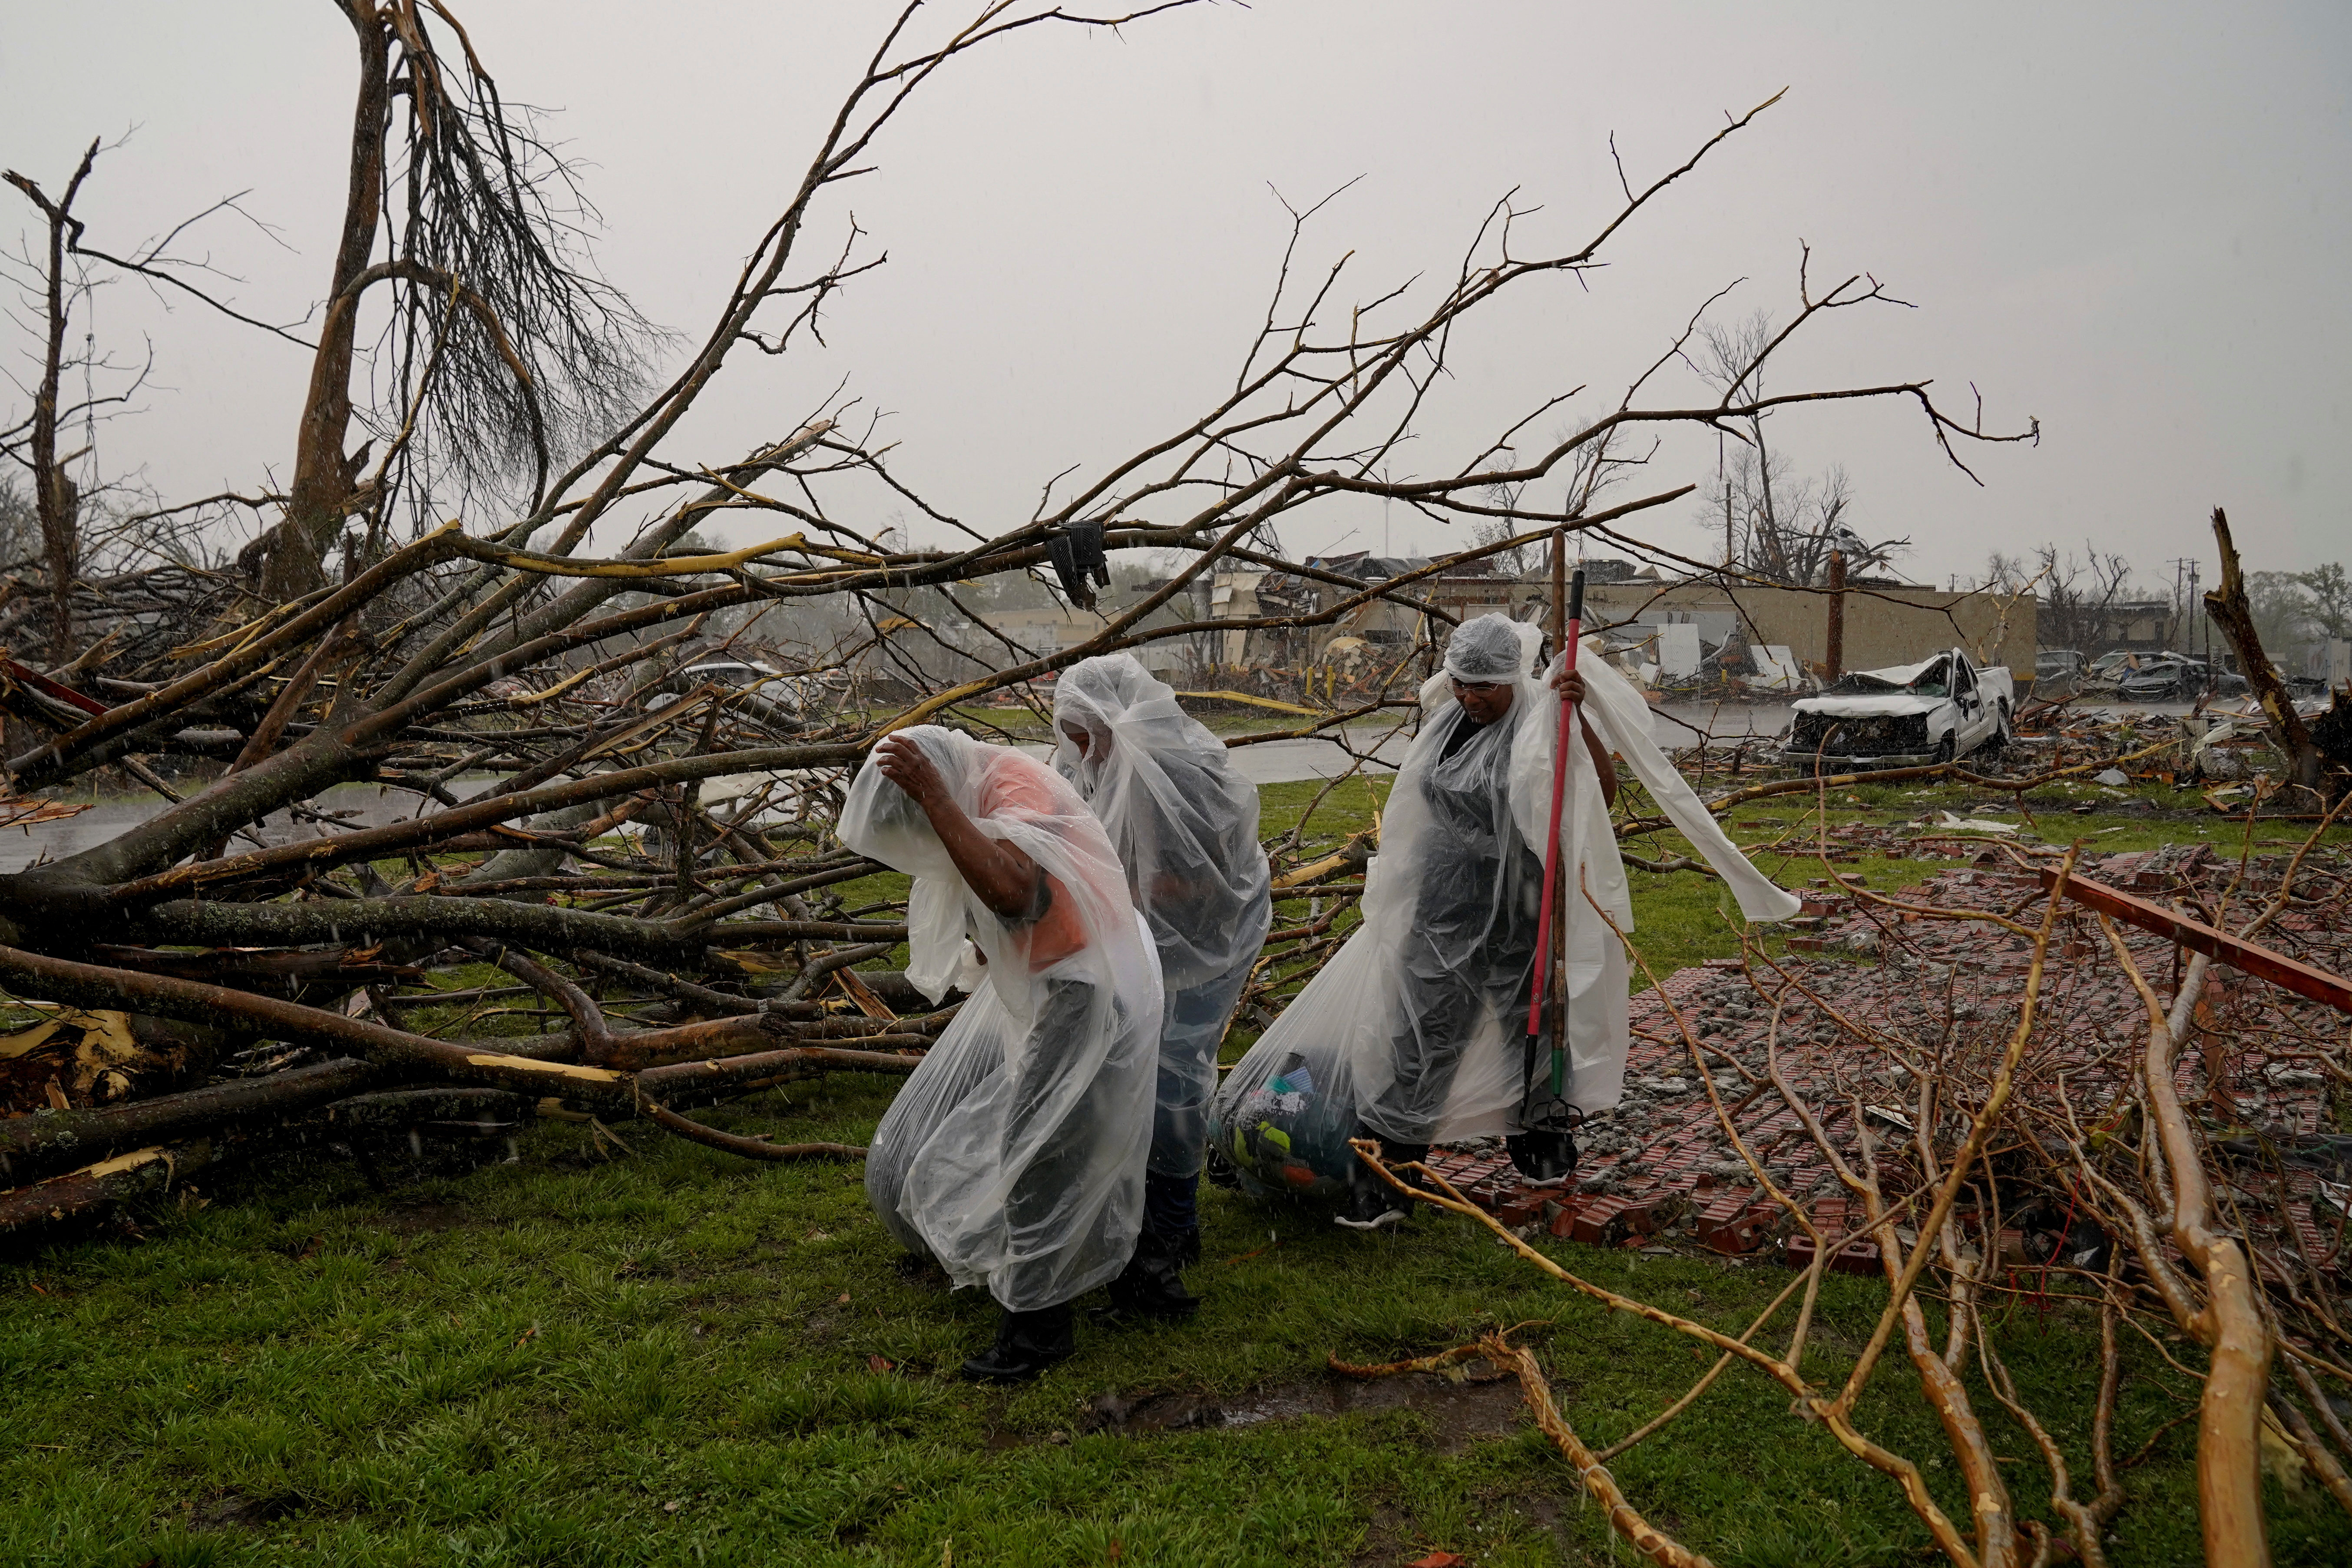 Tornadoes hit communities across central Mississippi